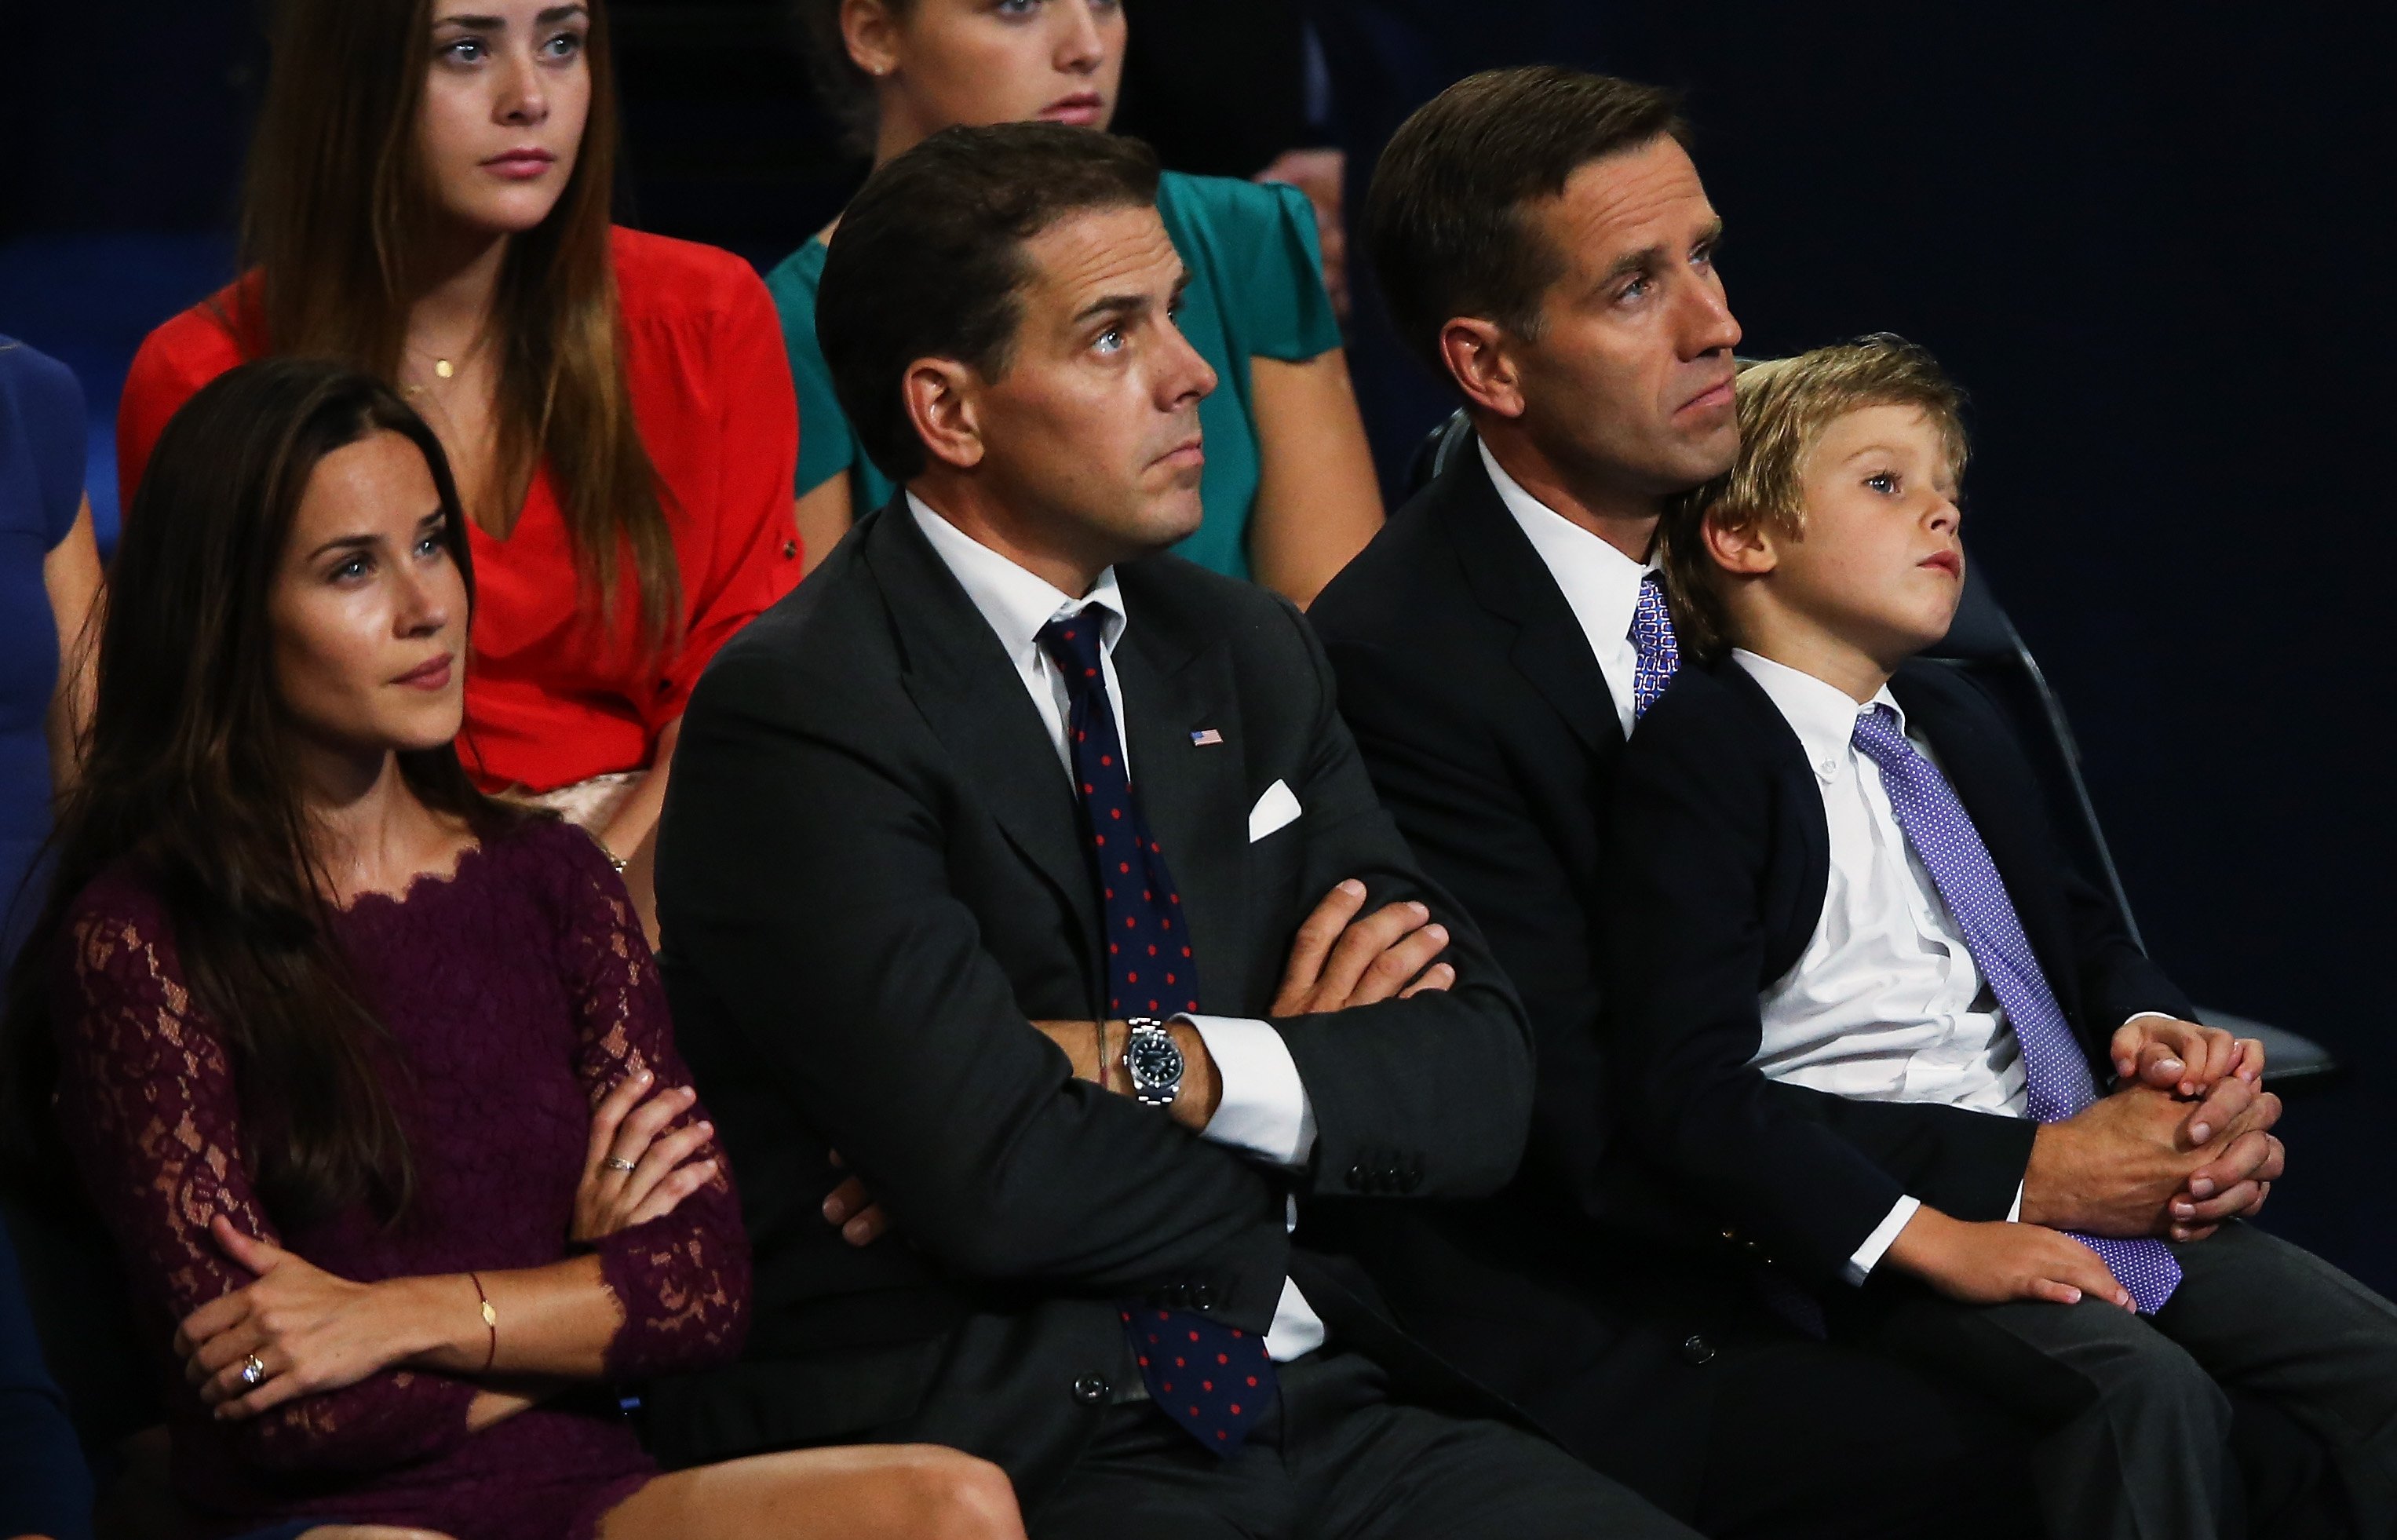 Hunter Biden with late brother Joseph "Beau" Biden at the Democratic National Convention at Time Warner Cable Arena in Charlotte, North Carolina | Photo: Getty Images